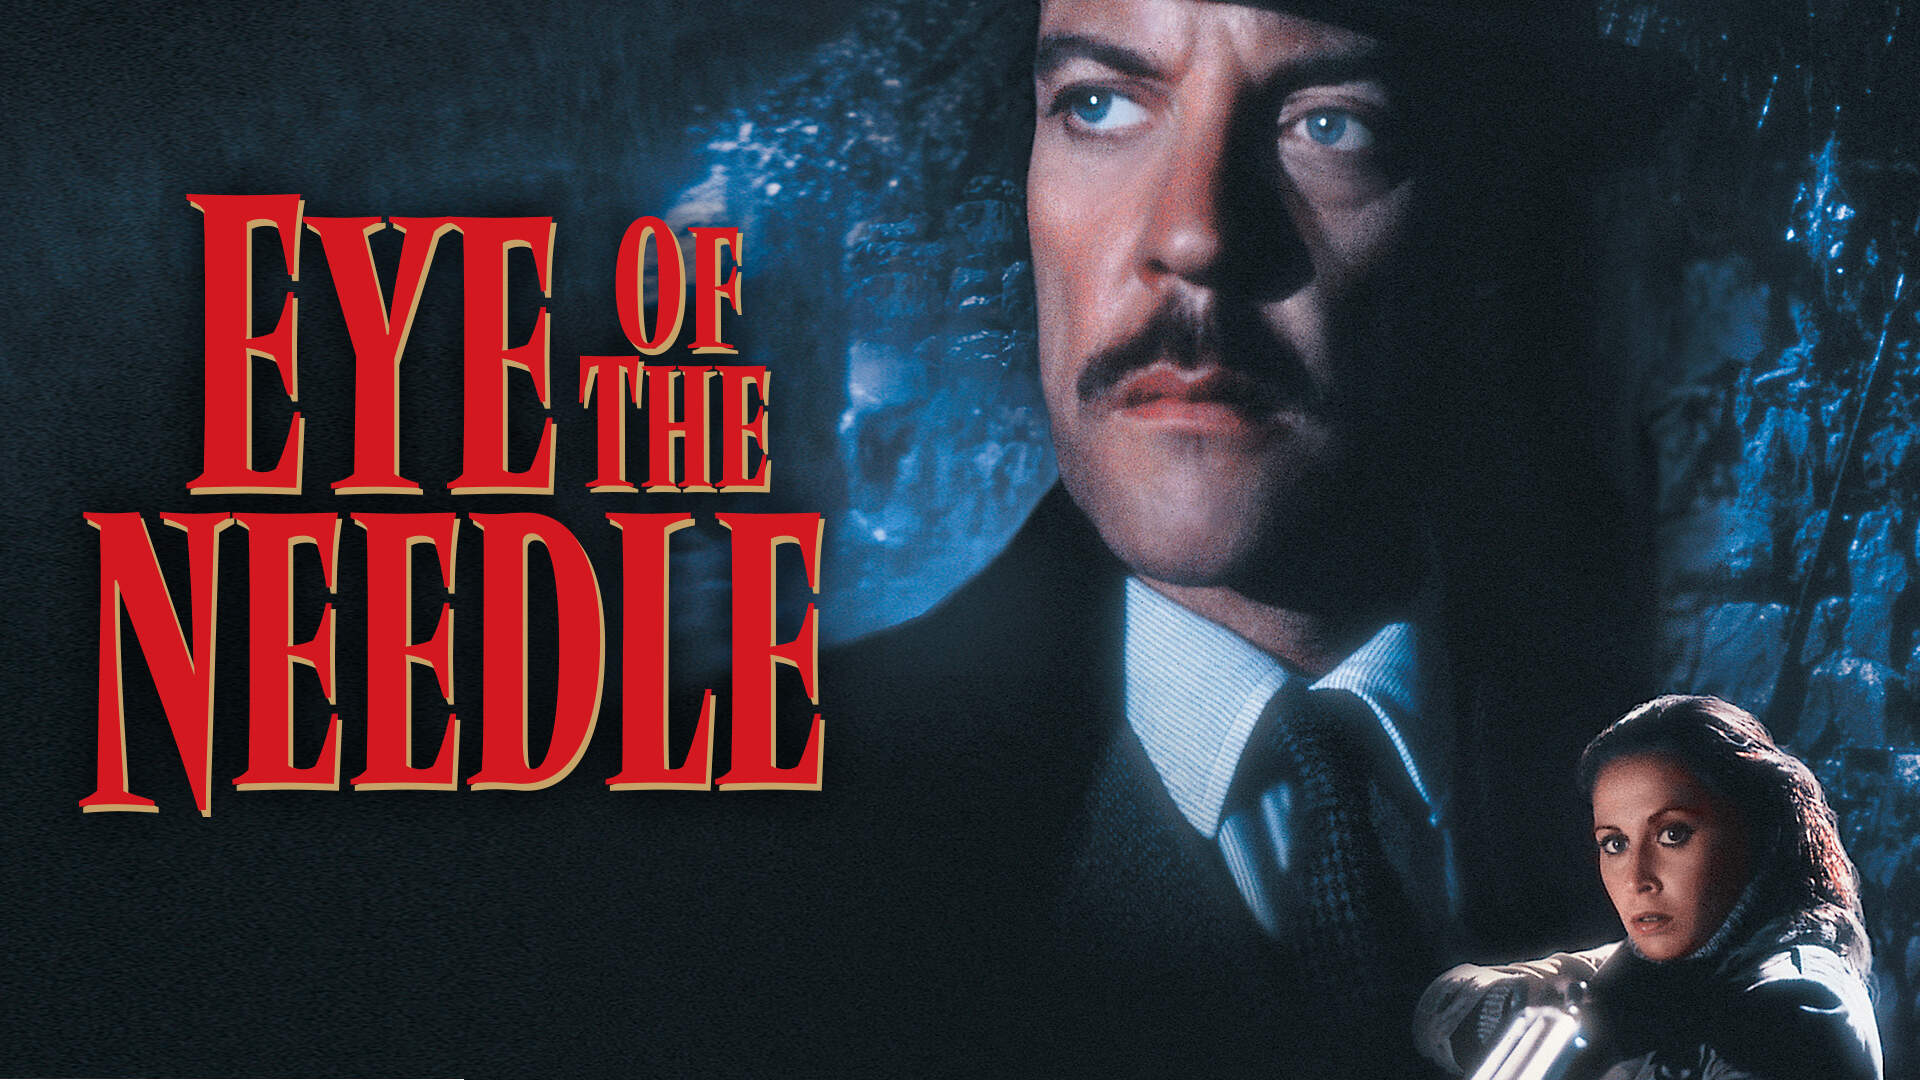 39-facts-about-the-movie-eye-of-the-needle